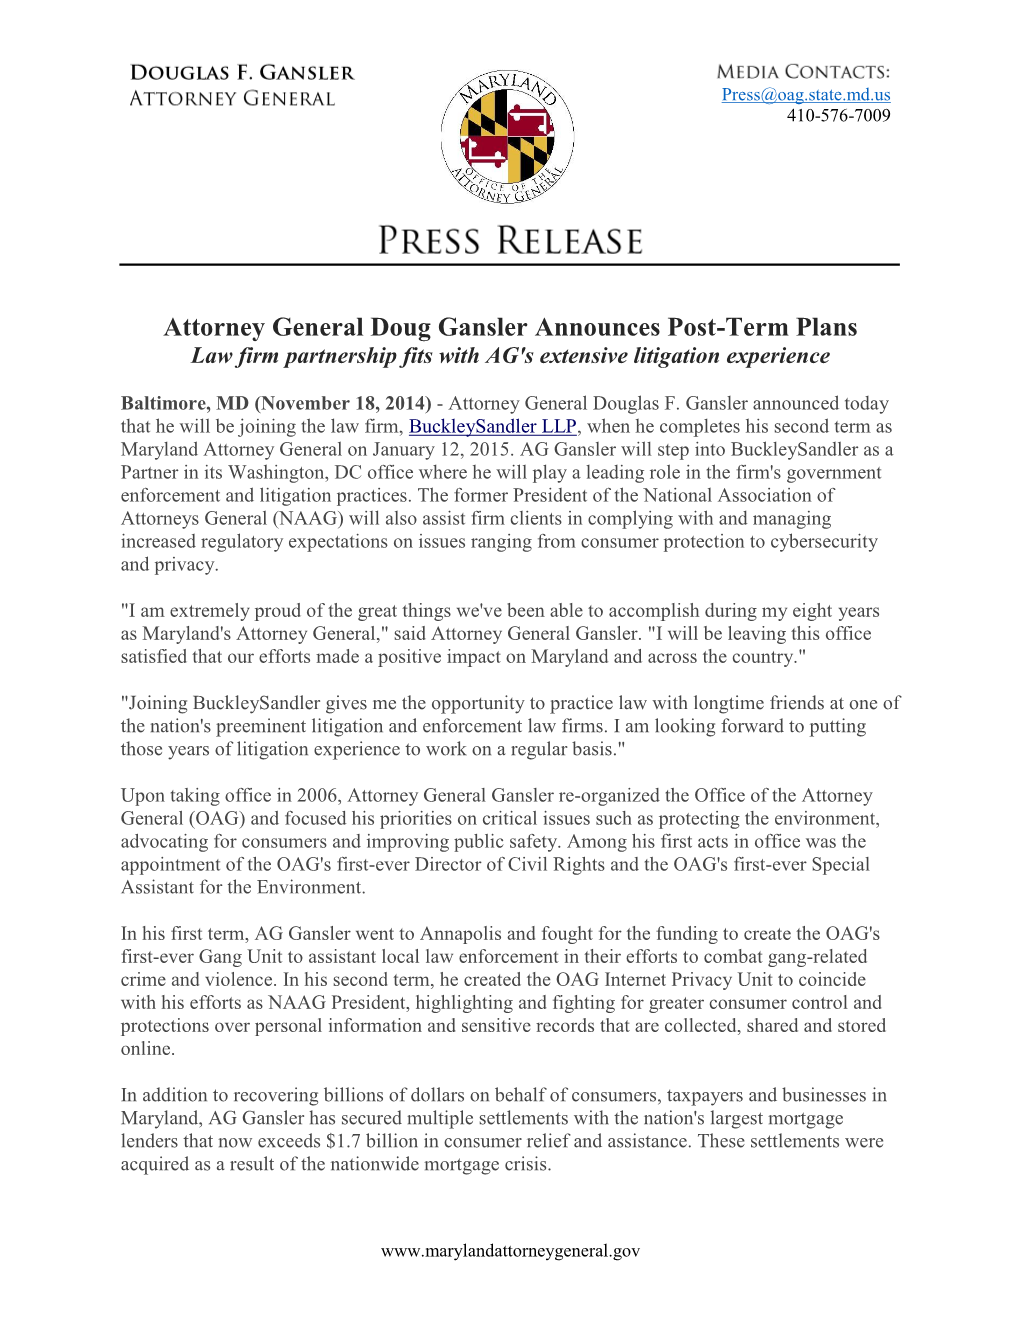 Attorney General Doug Gansler Announces Post-Term Plans Law Firm Partnership Fits with AG's Extensive Litigation Experience